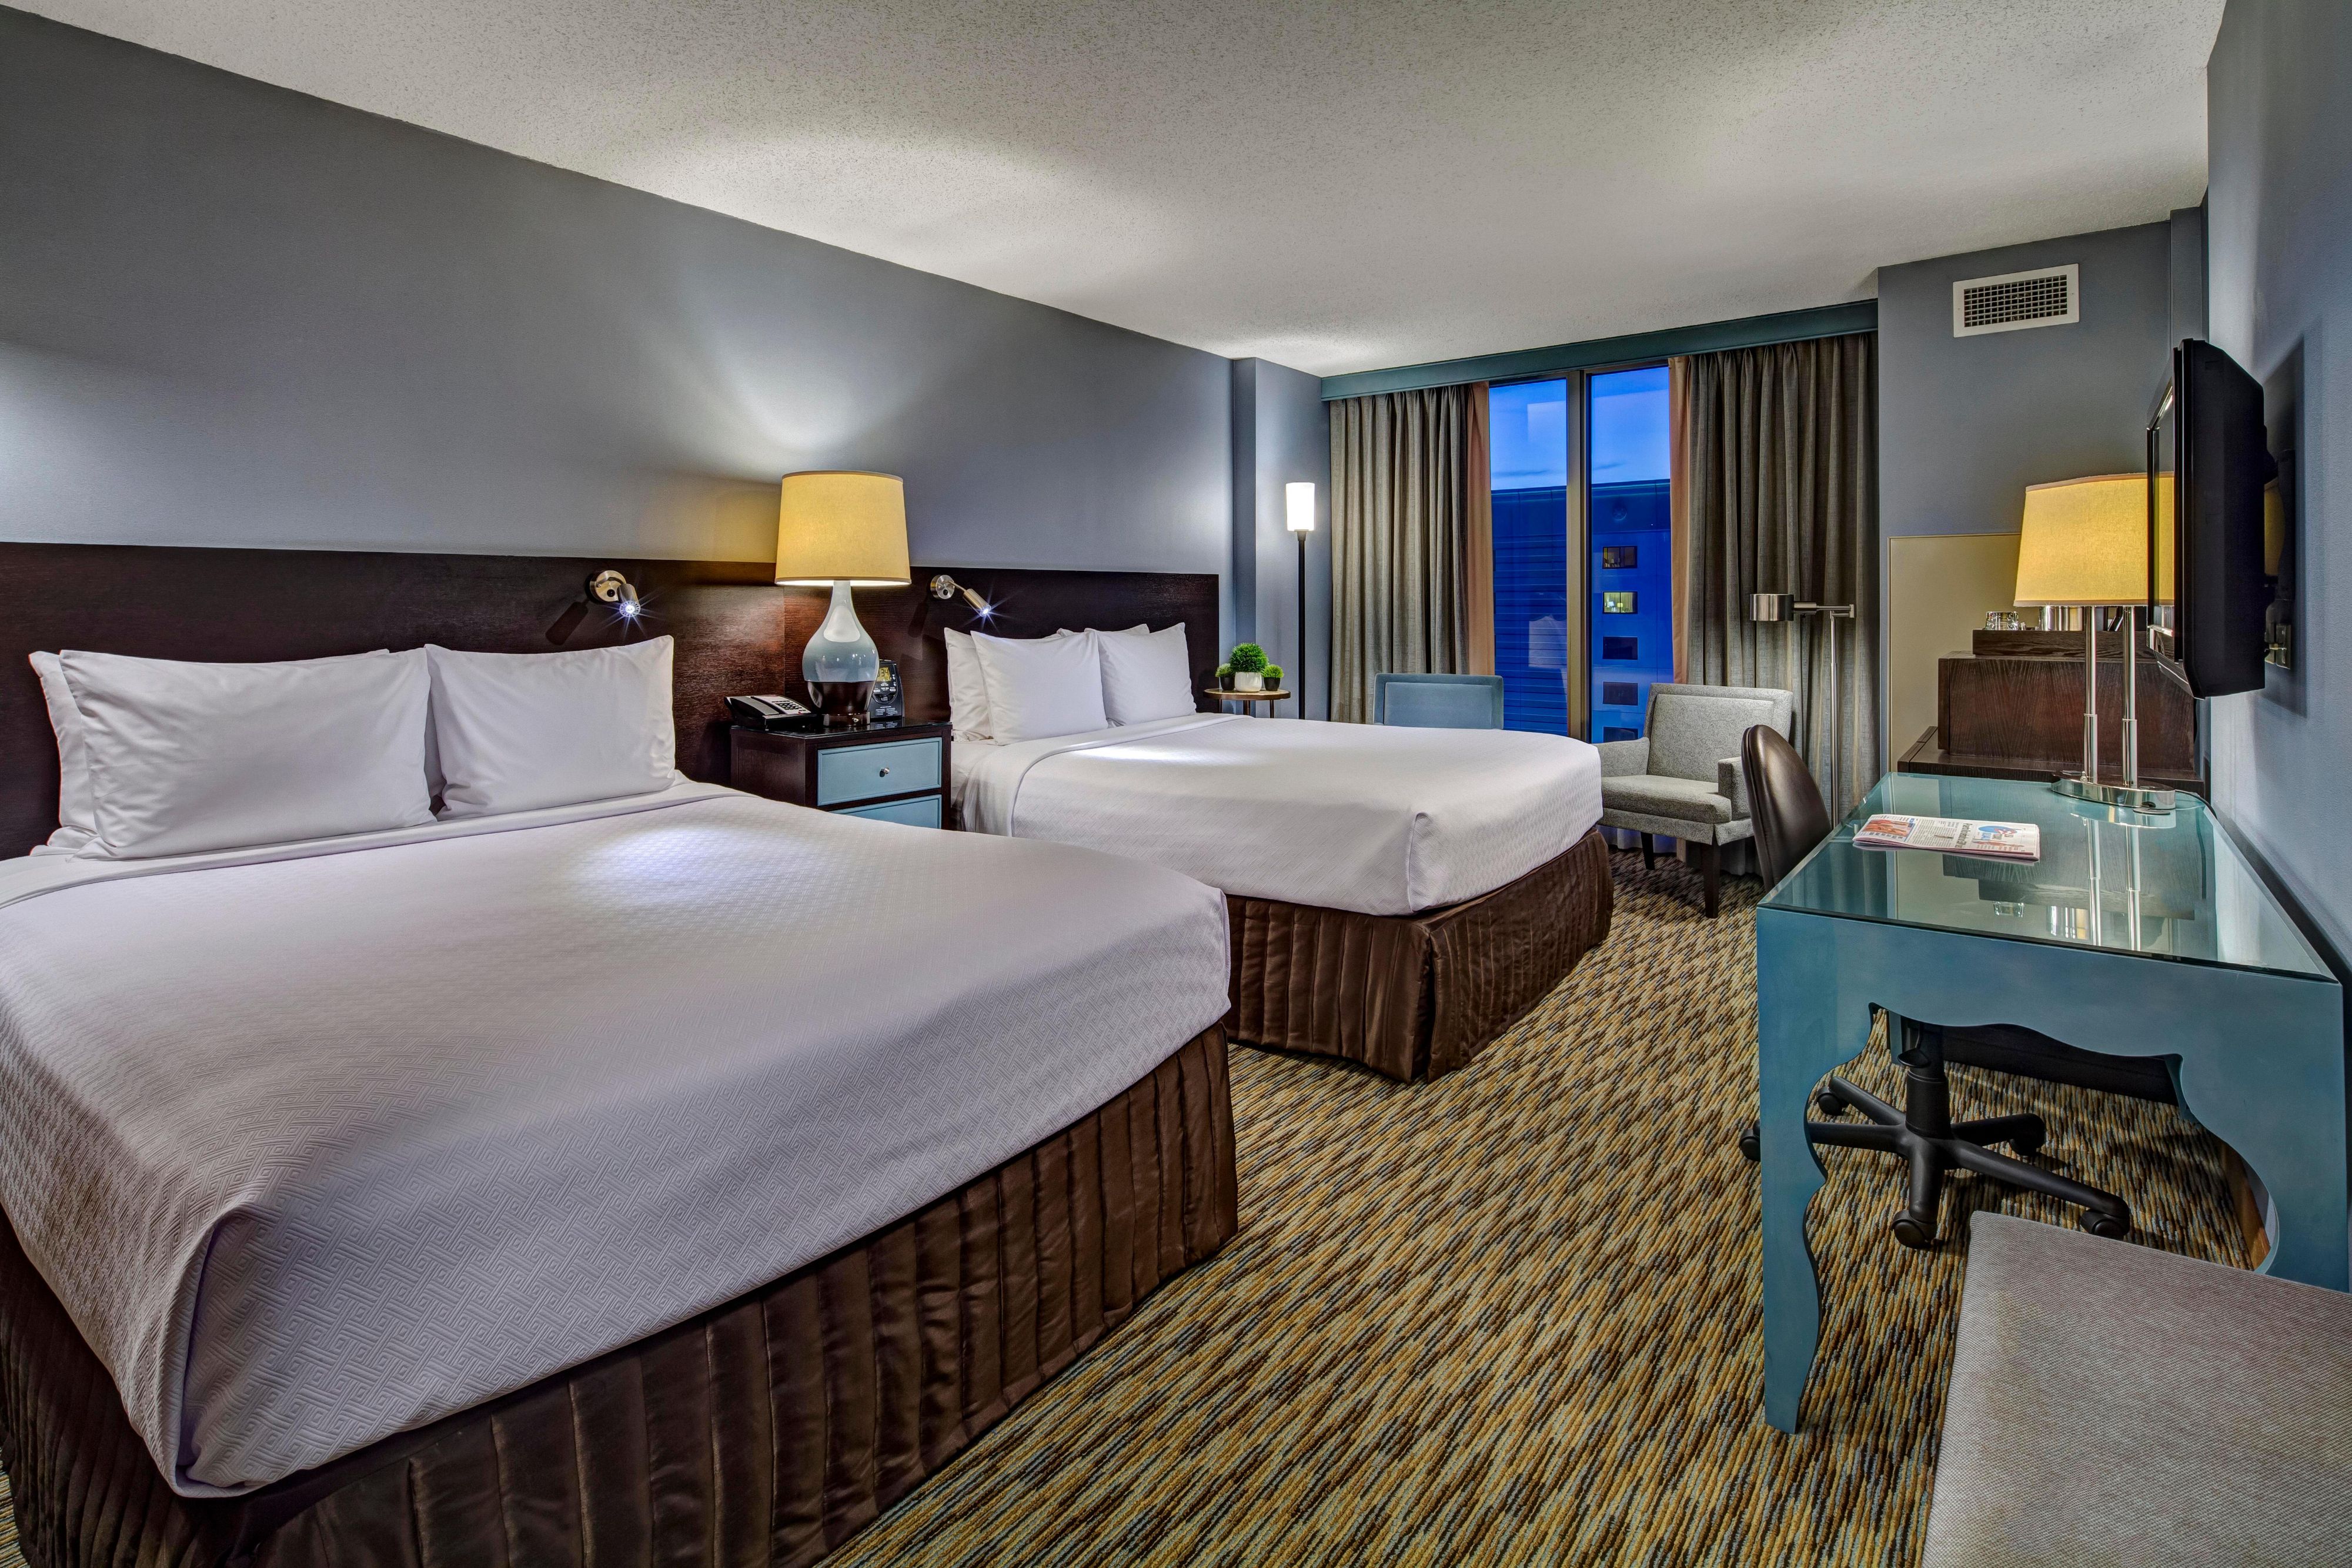 Indulge yourself in our warm, welcoming guest rooms.